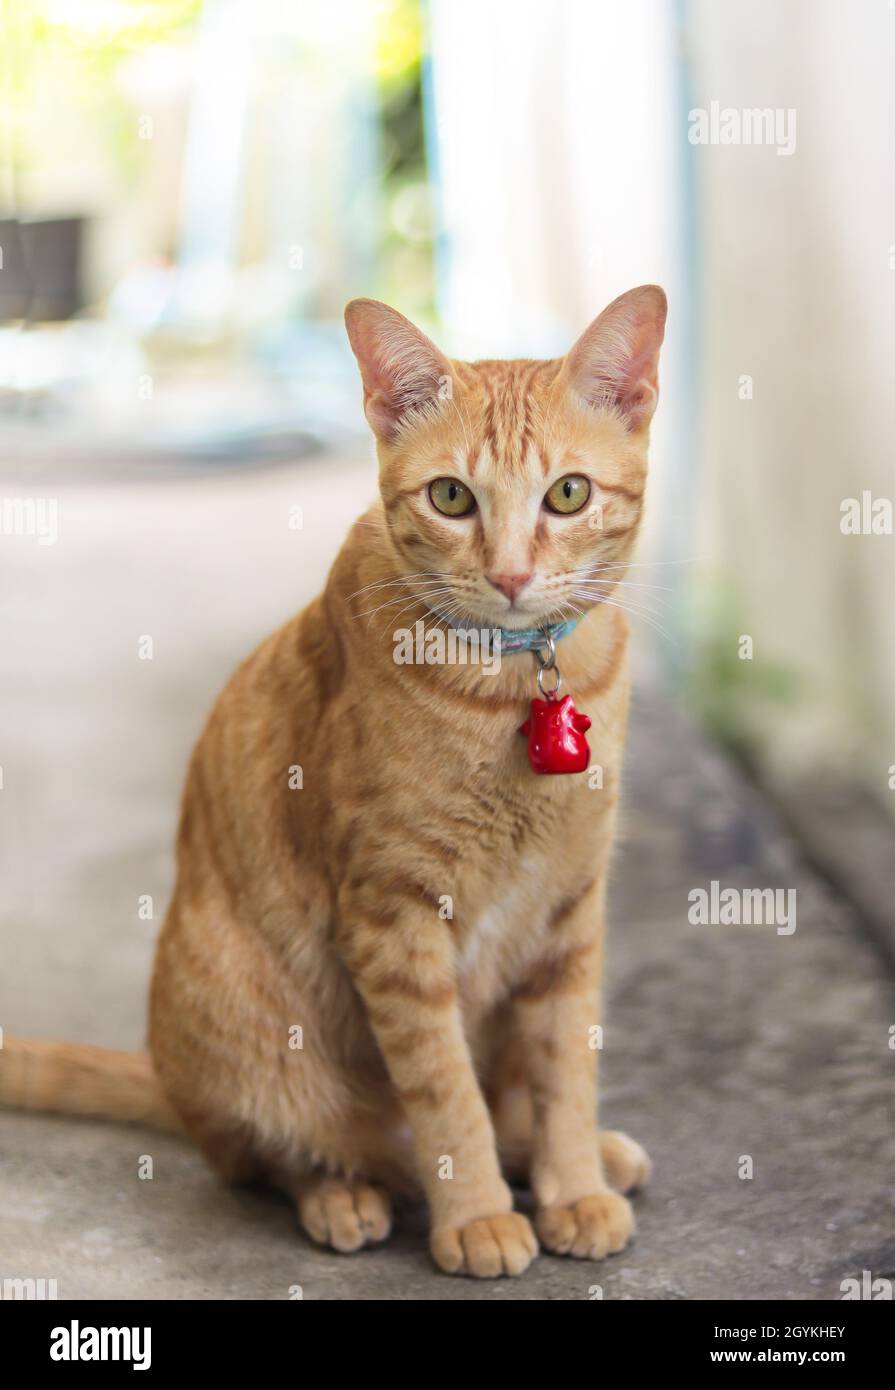 An orange cat wears a collar and hangs a red bell, sitting and looking at  the camera. Blurred background, copy space Stock Photo - Alamy